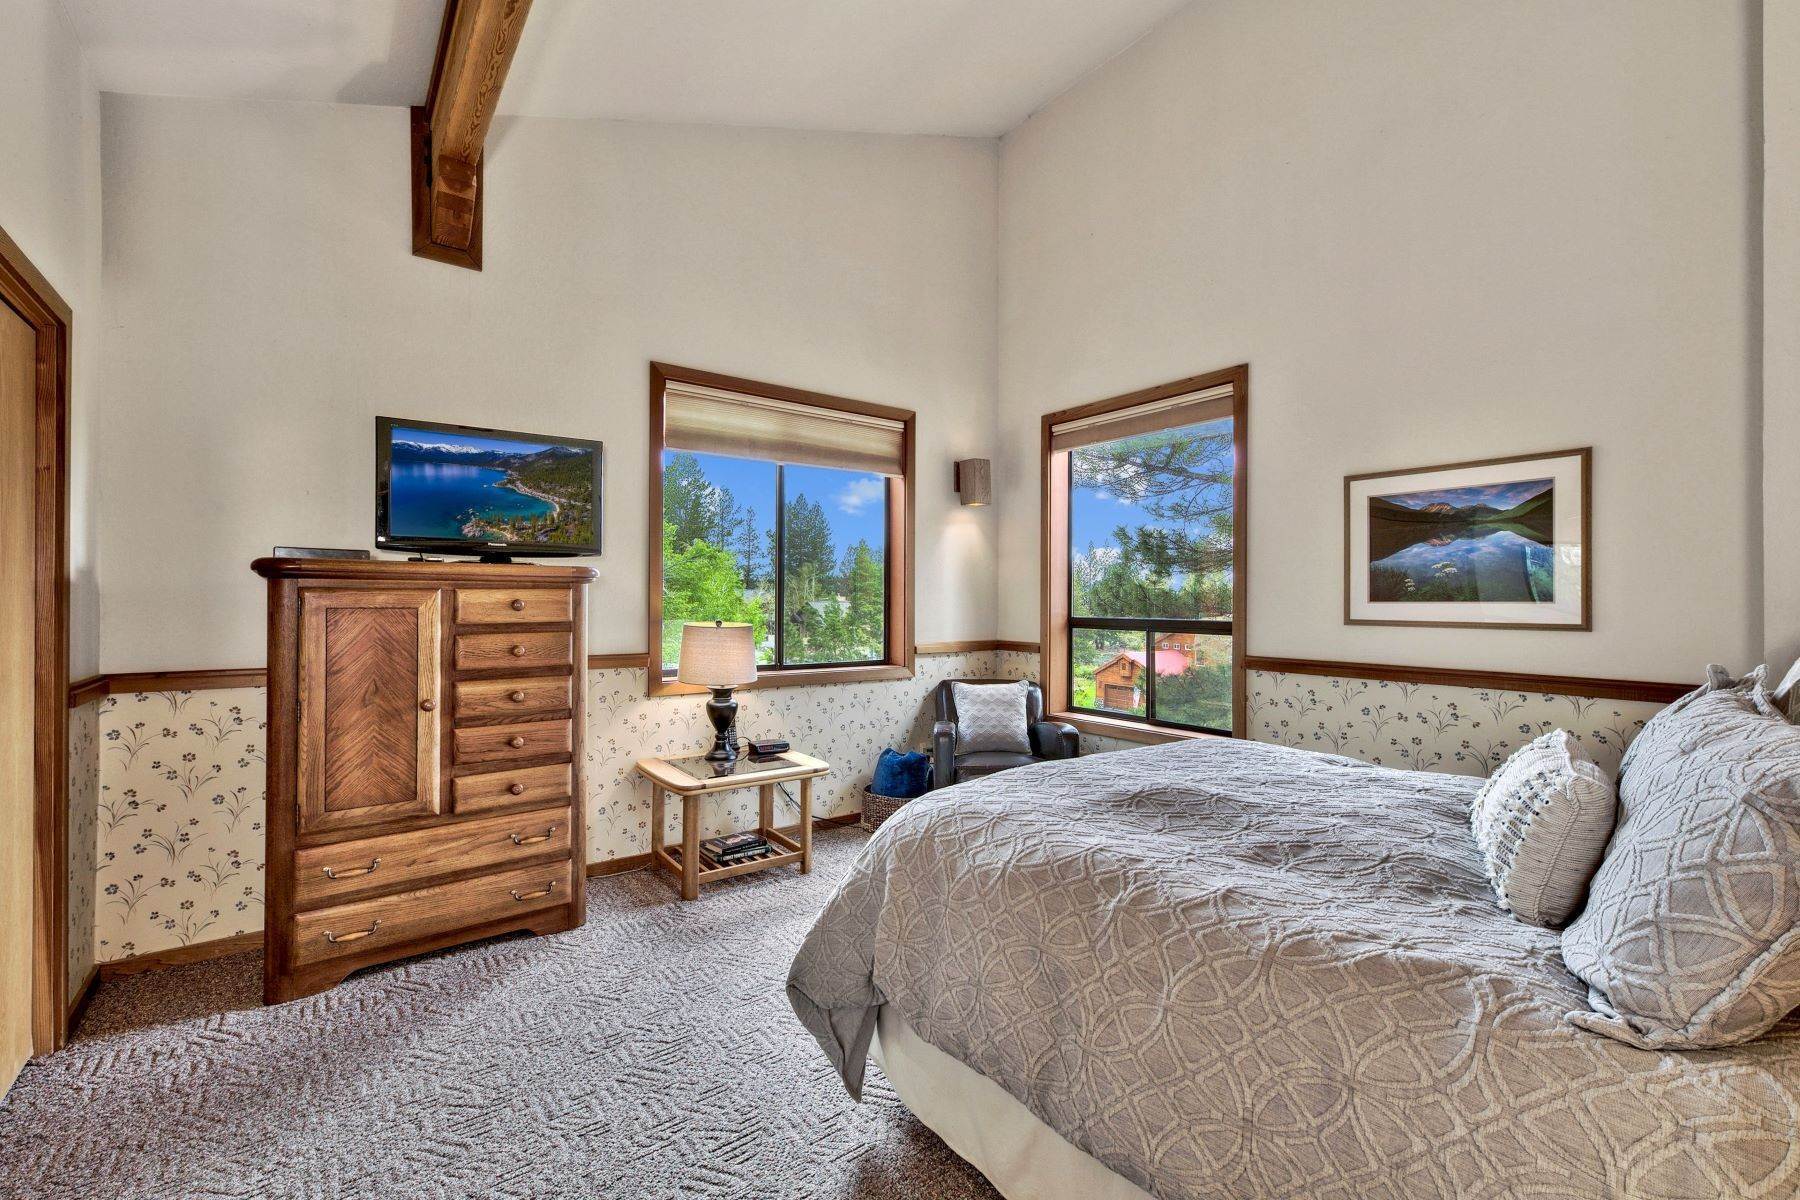 19. Fractional Ownership Property for Active at Ideal Vacation Cabin in Northstar 253 Basque Dr Truckee, California 96161 United States